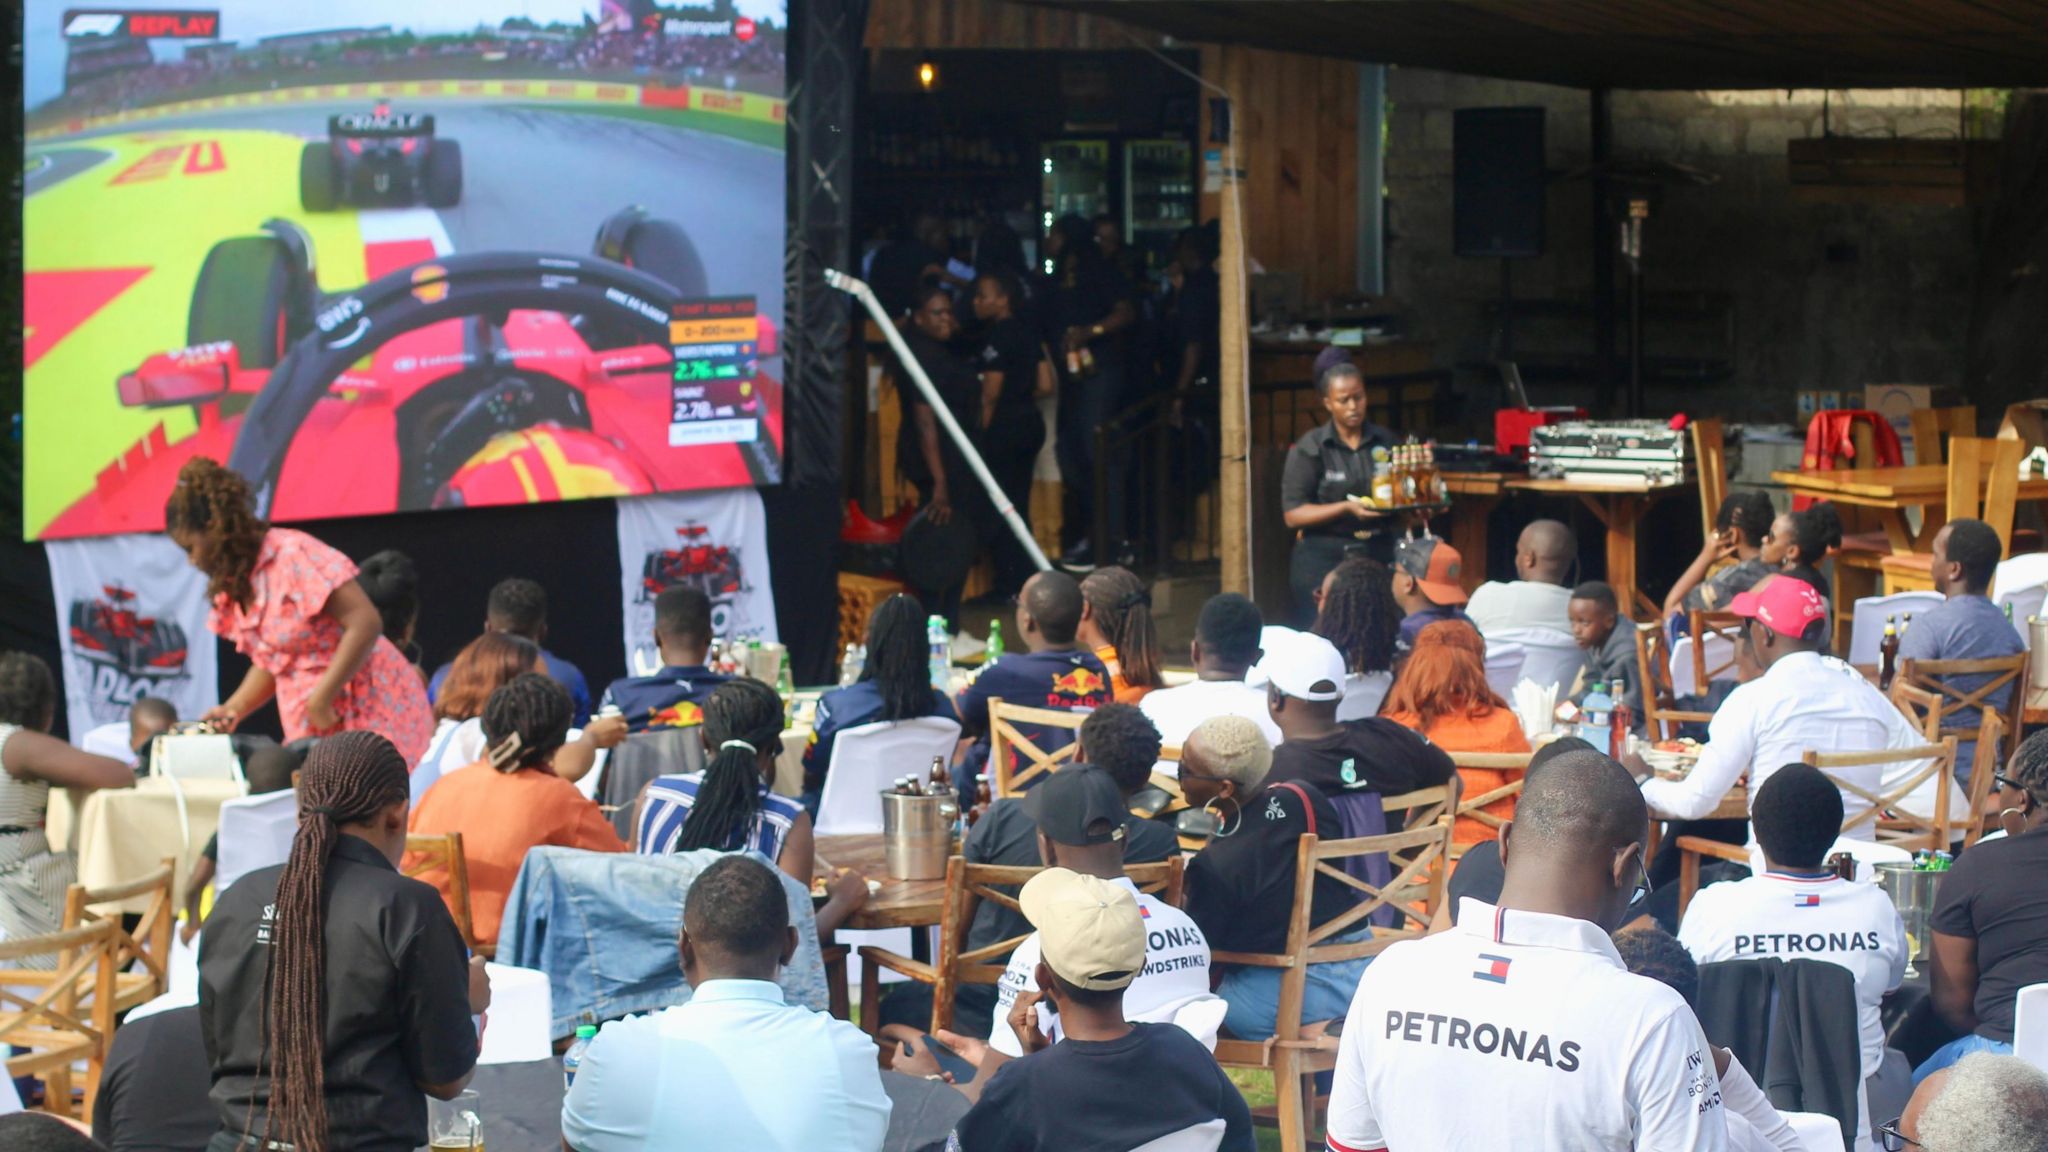 Members of Paddock Experience, a Formula 1 club in Kenya, watching a race at an entertainment spot in Nairobi